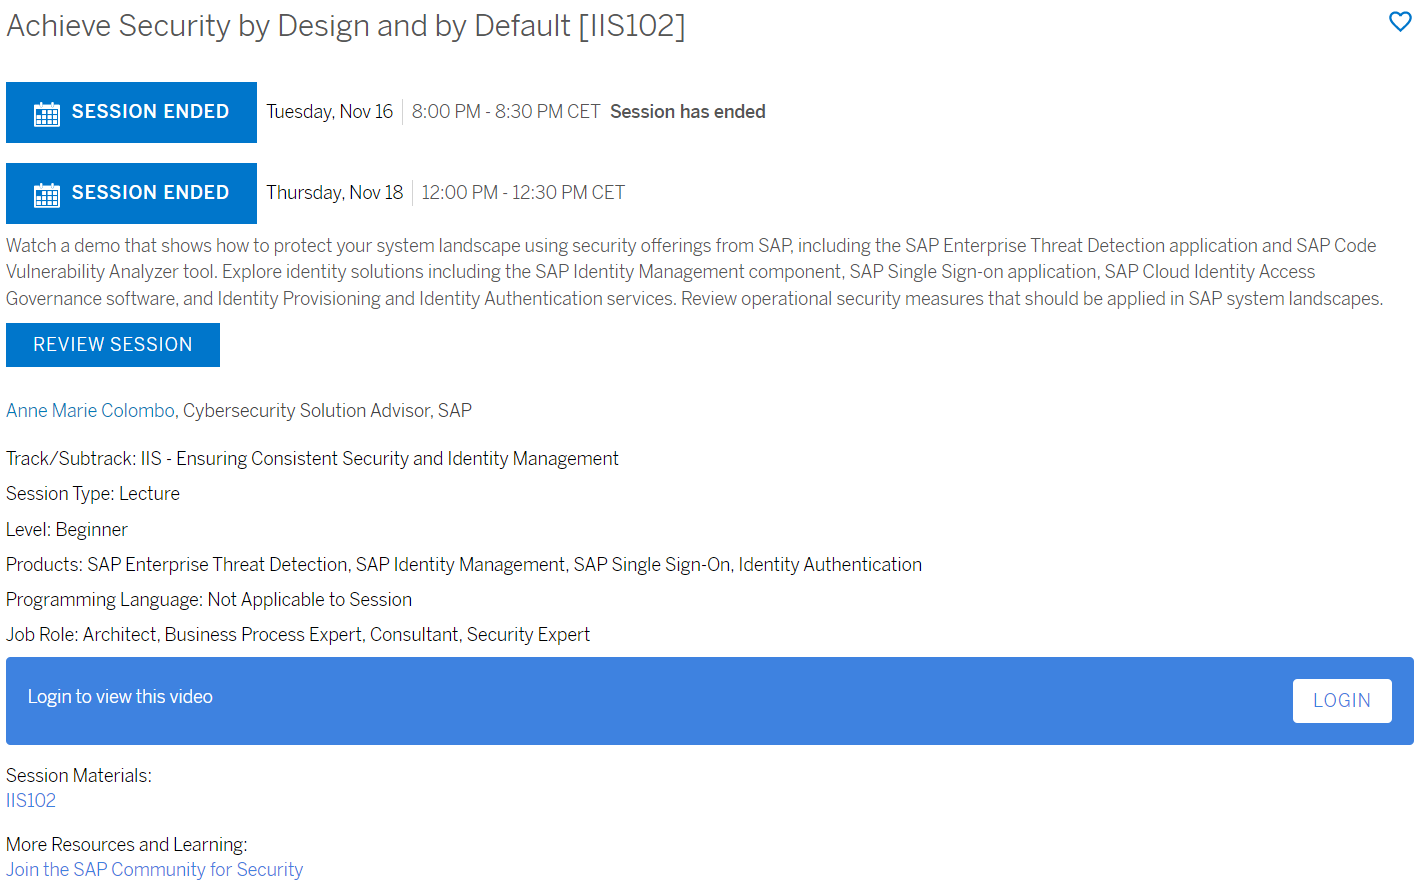 Download SAP TechEd Session Material image